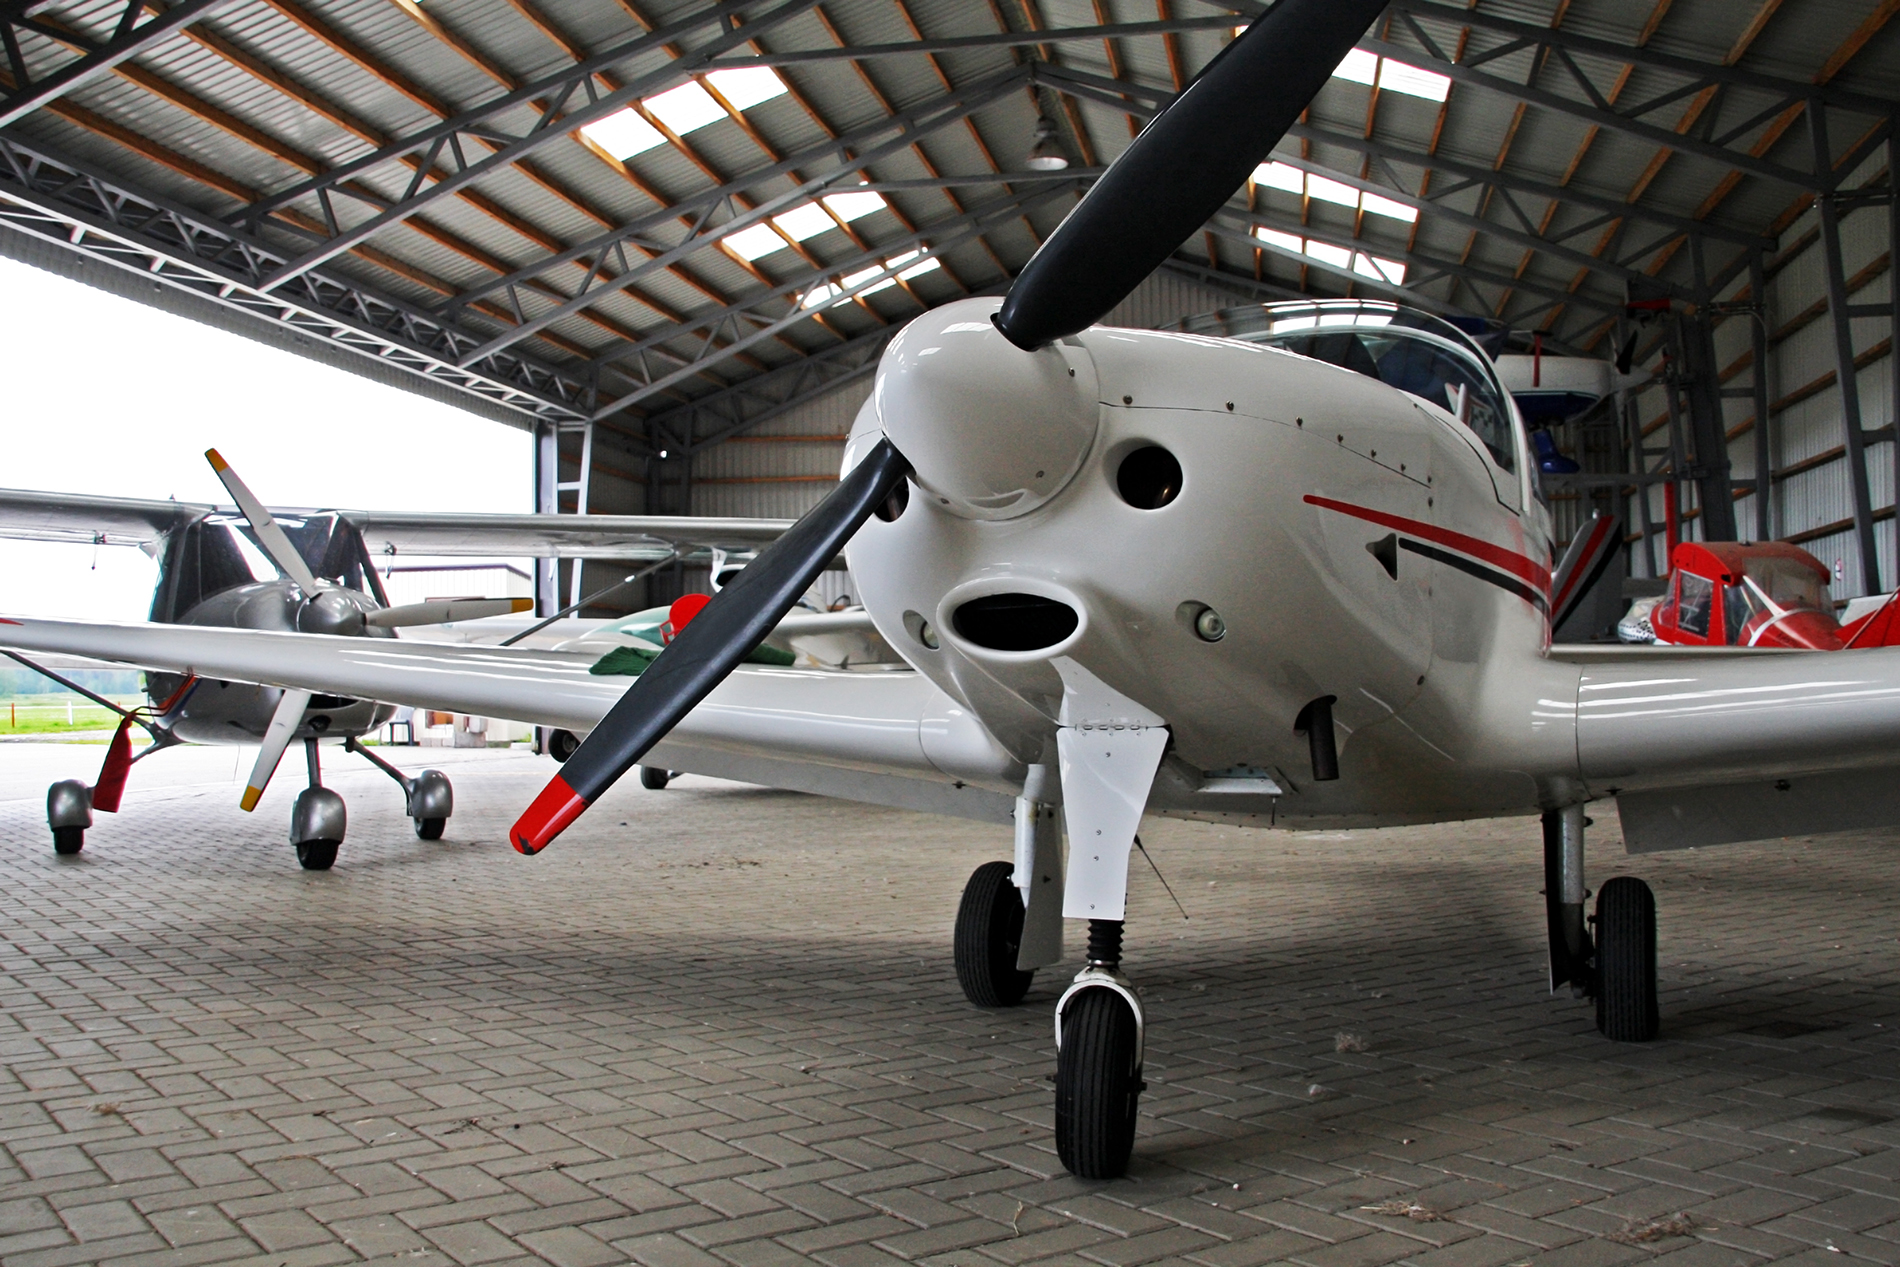 Small white plain with red trim in a hangar